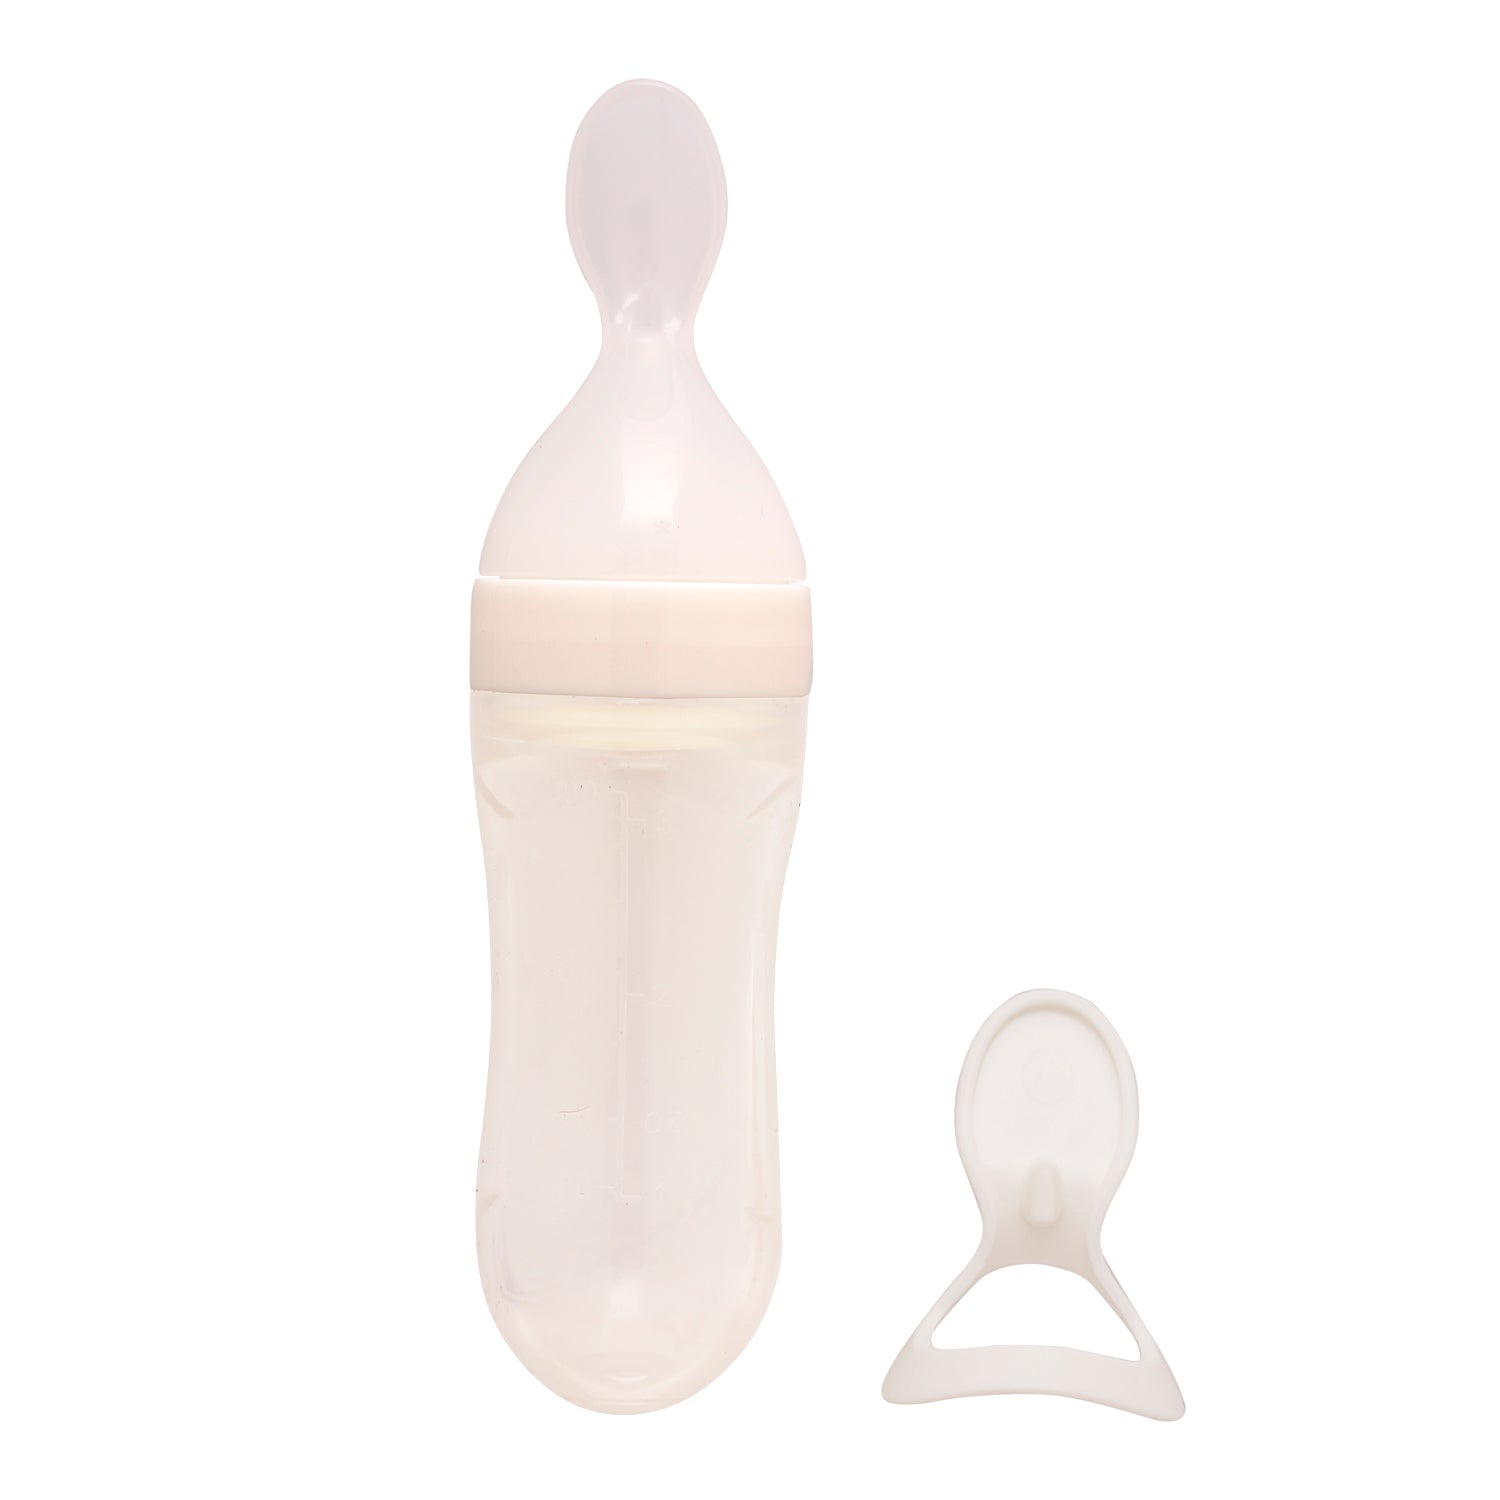 White 90 Ml Squeeze Bottle Feeder With Dispensing Spoon - Baby Moo